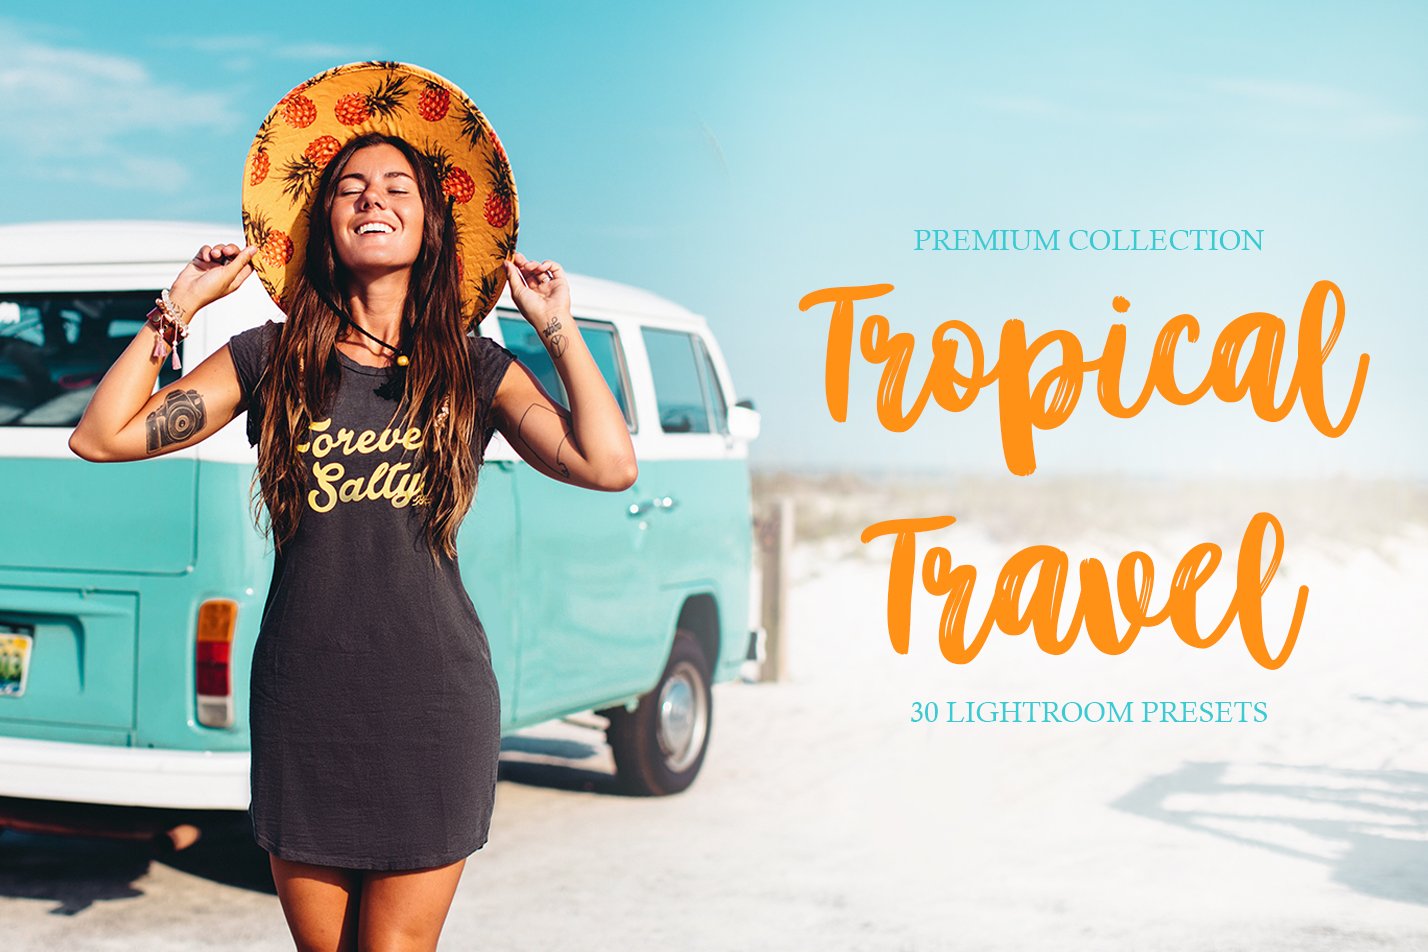 Tropical Travel Presets Lightroomcover image.